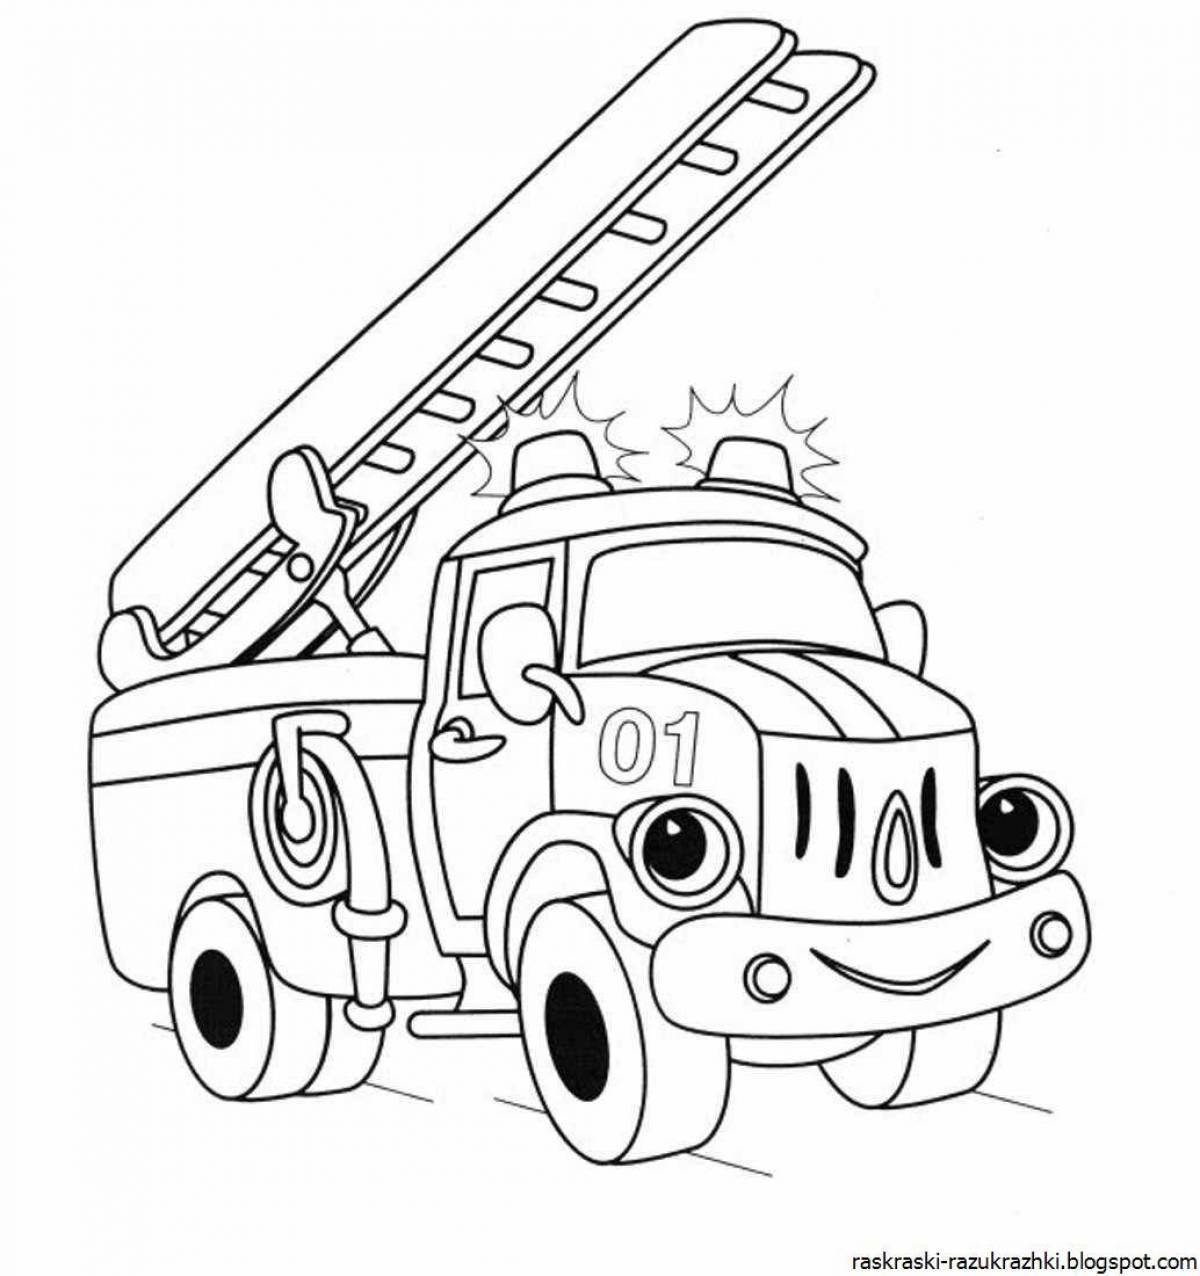 Cool fire truck coloring book for kids 3-4 years old